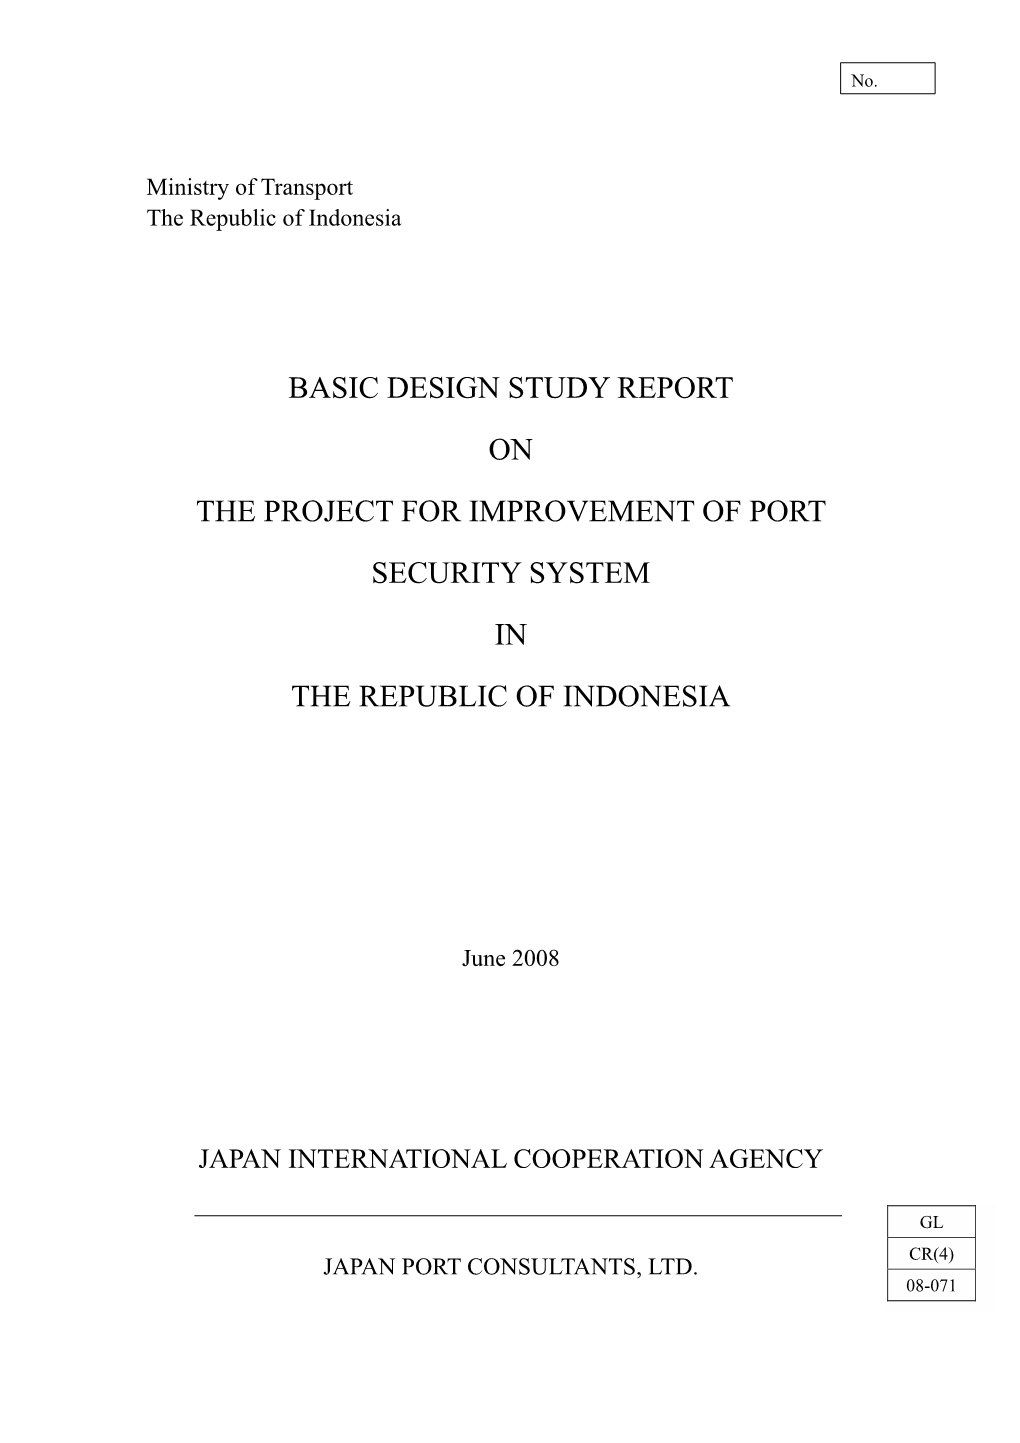 Basic Design Study Report on the Project for Improvement of Port Security System in the Republic of Indonesia